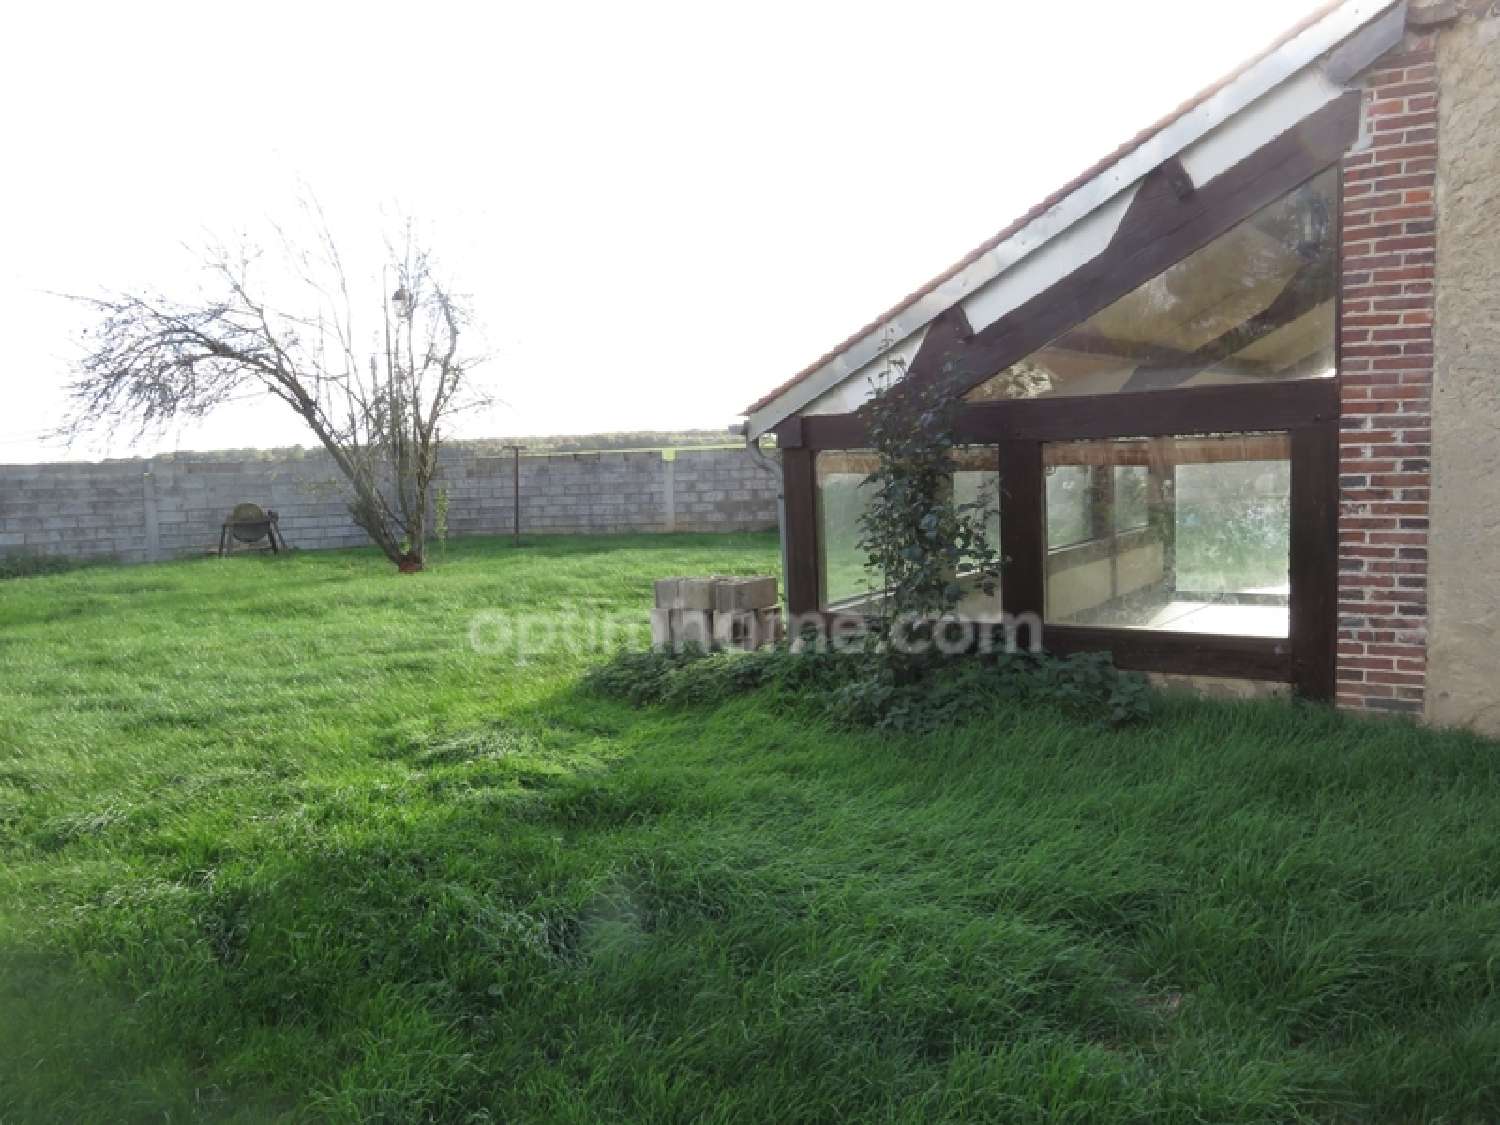  for sale farm Marcilly-la-Campagne Eure 2